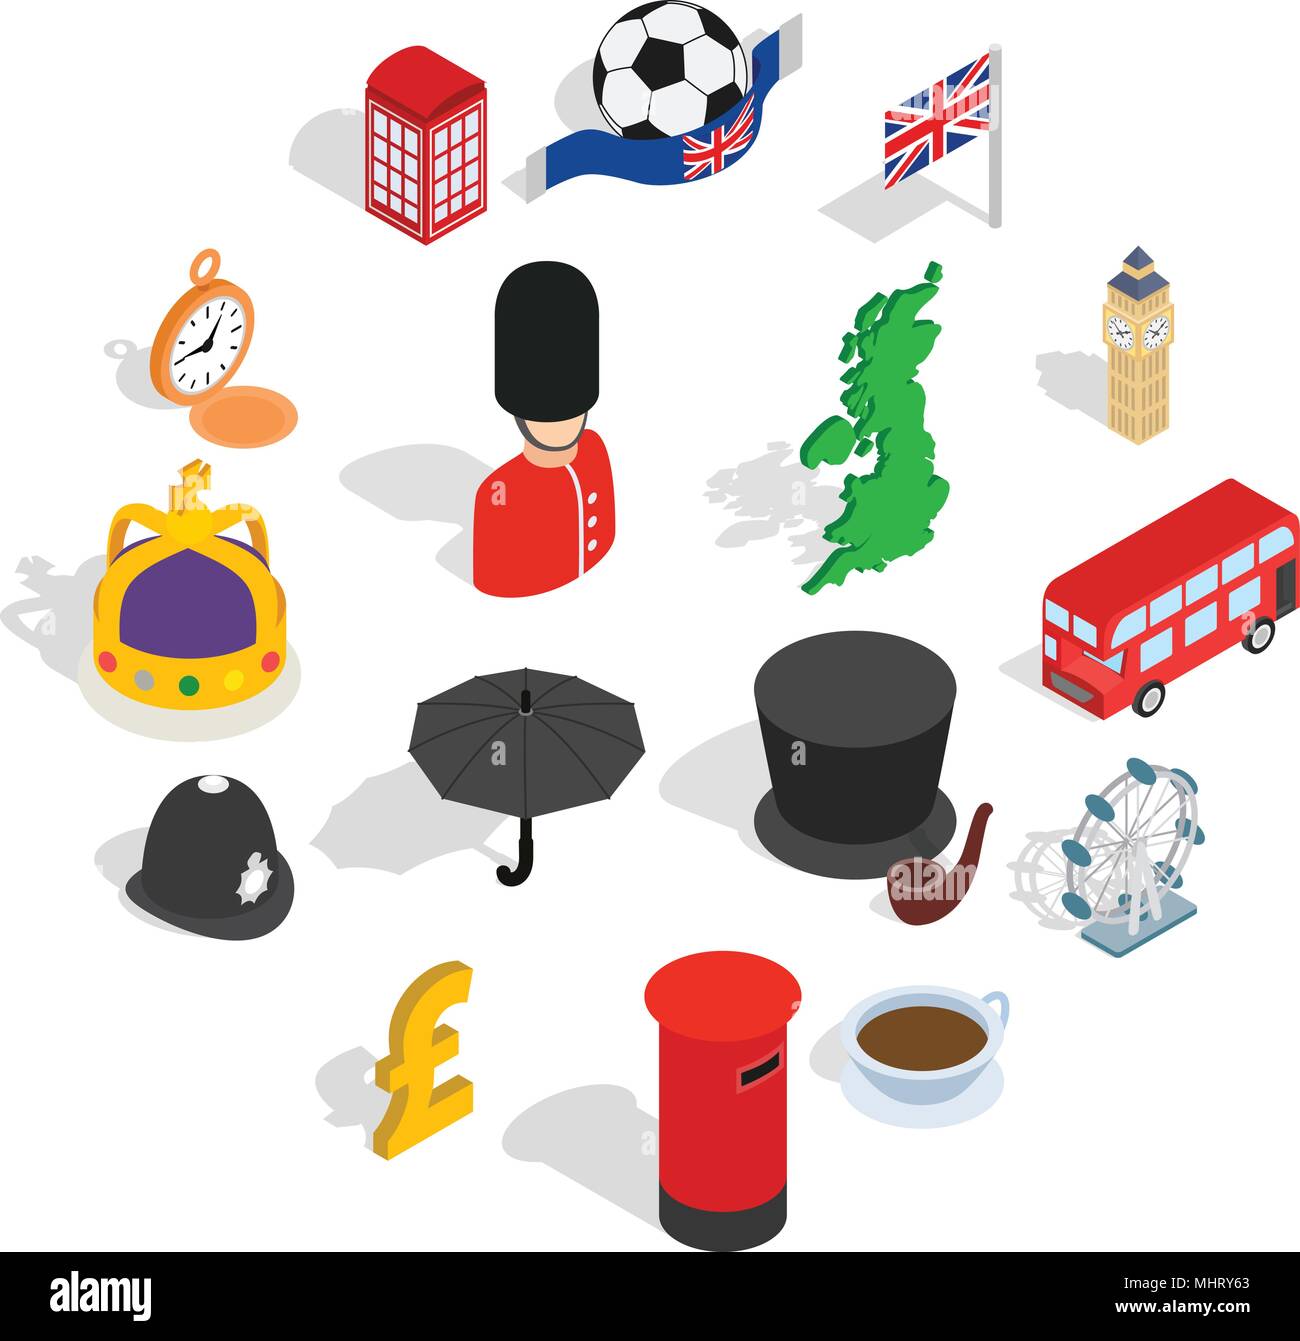 England icons set, isometric 3d style Stock Vector